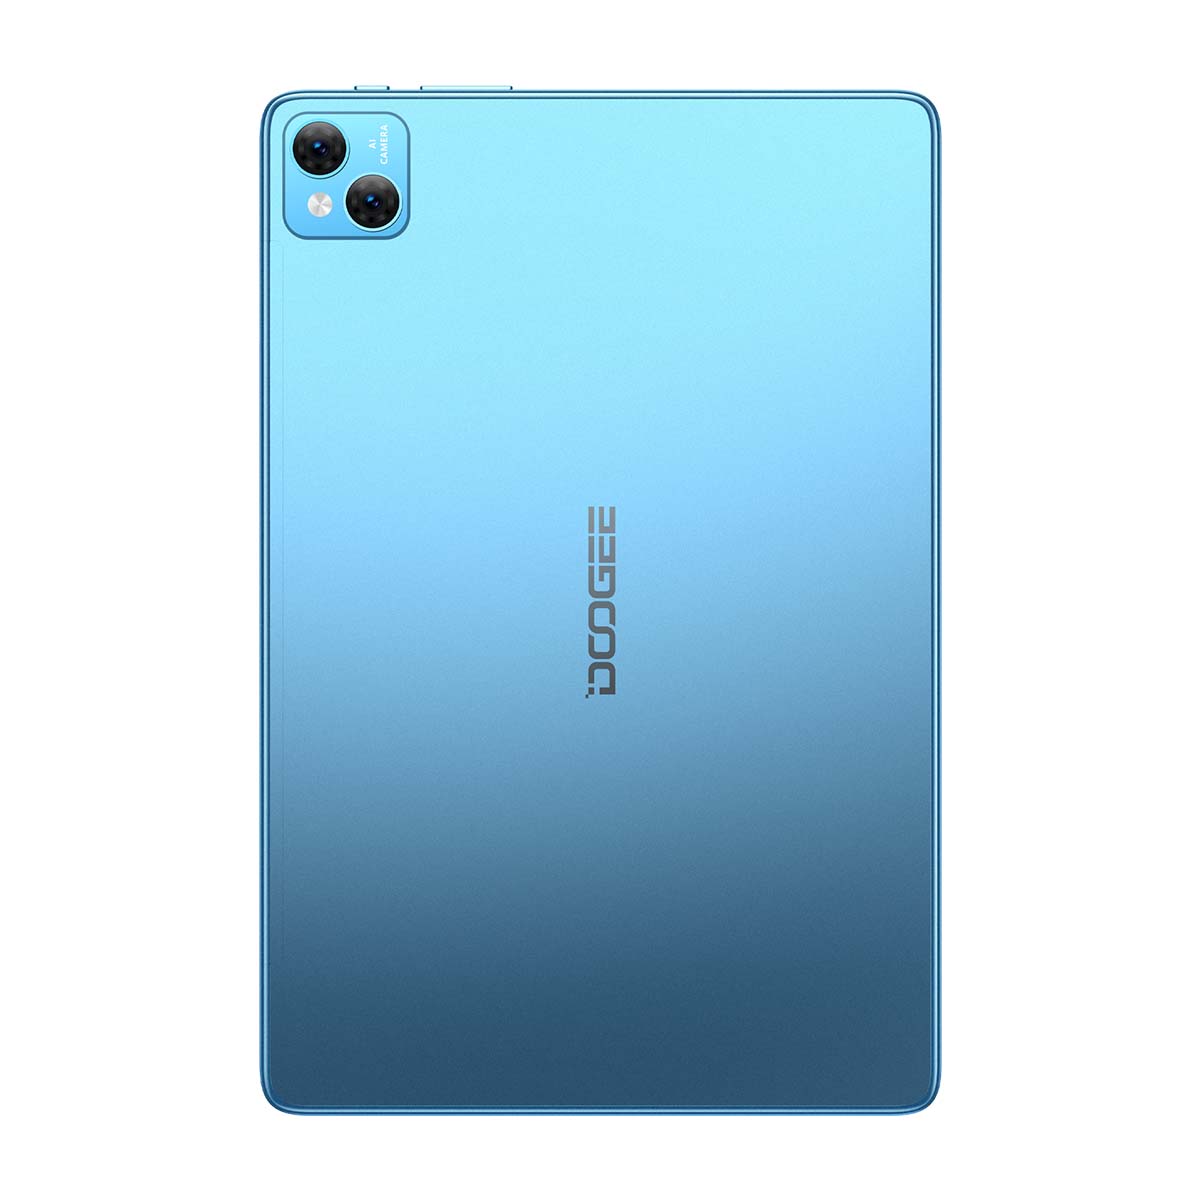 DOOGEE T10 4G Ultimate Tablet PC 10.1 Inch FHD+ Fullview Display 8GB RAN 128GB ROM 8300mAh Battery